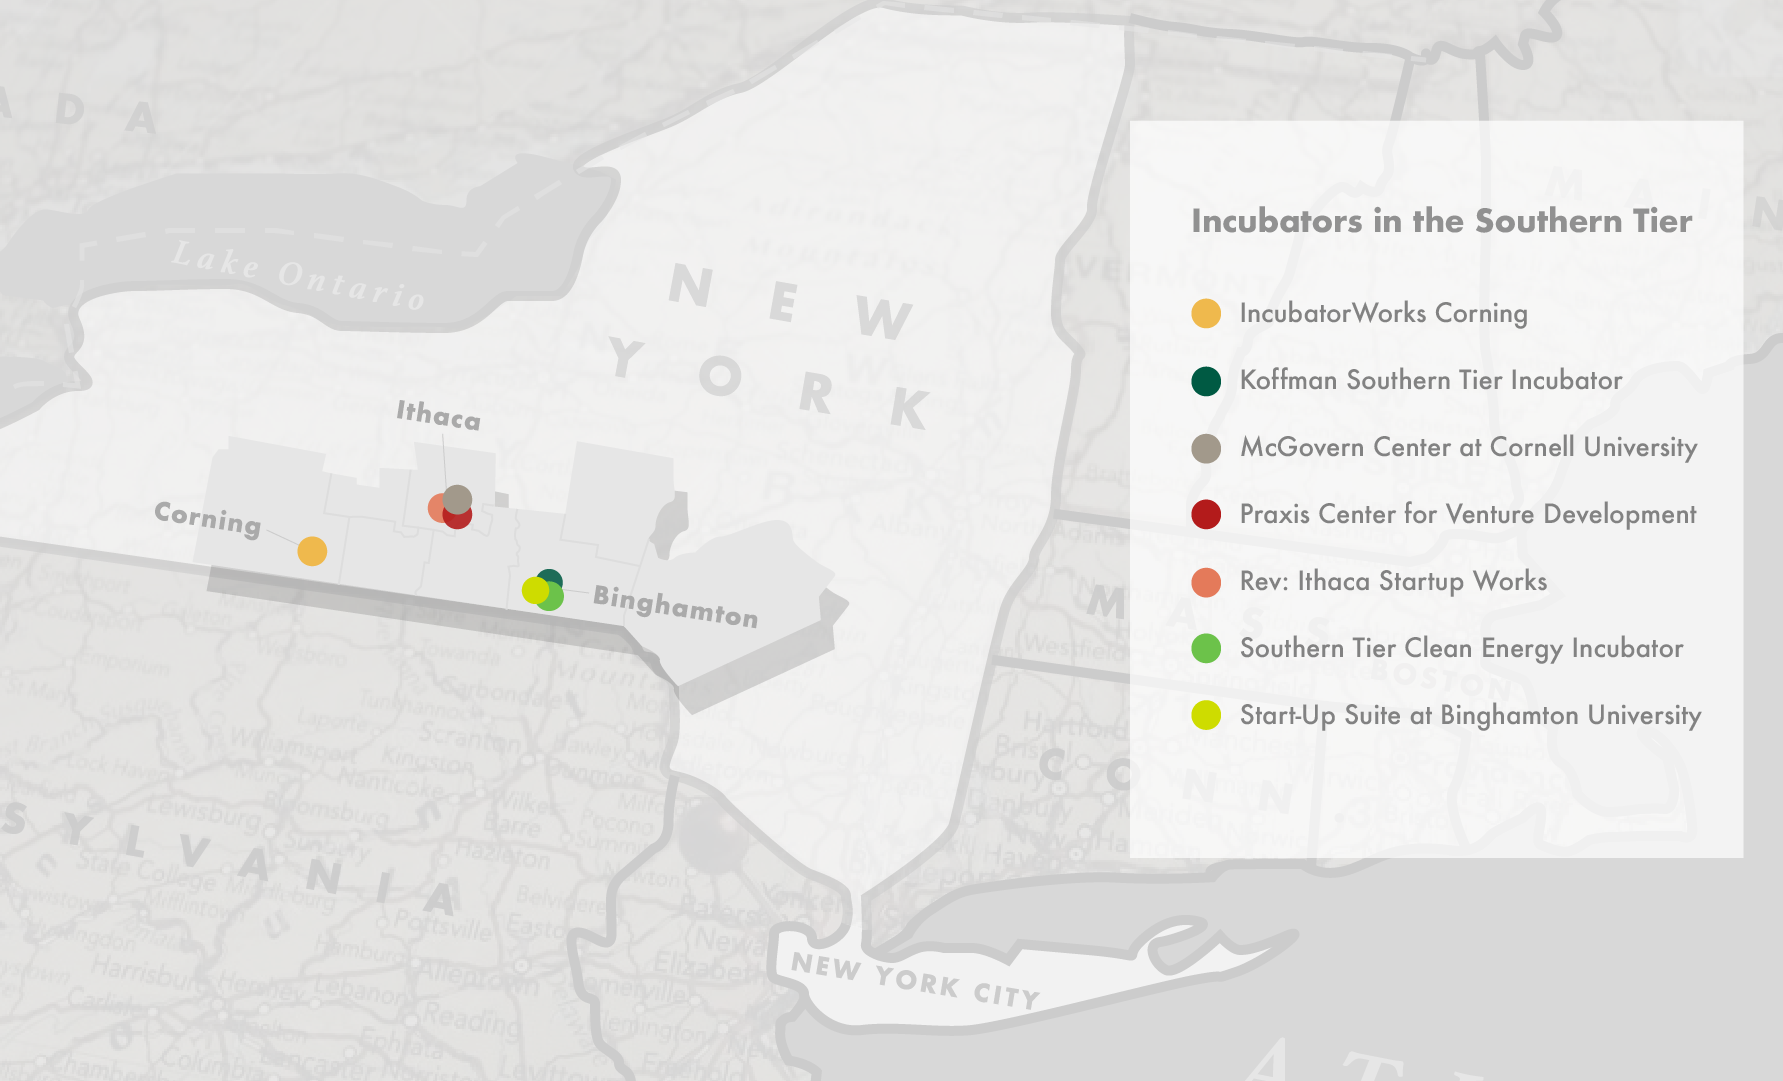 STSA Incubator Map showing the state of New York with dots showing incubators